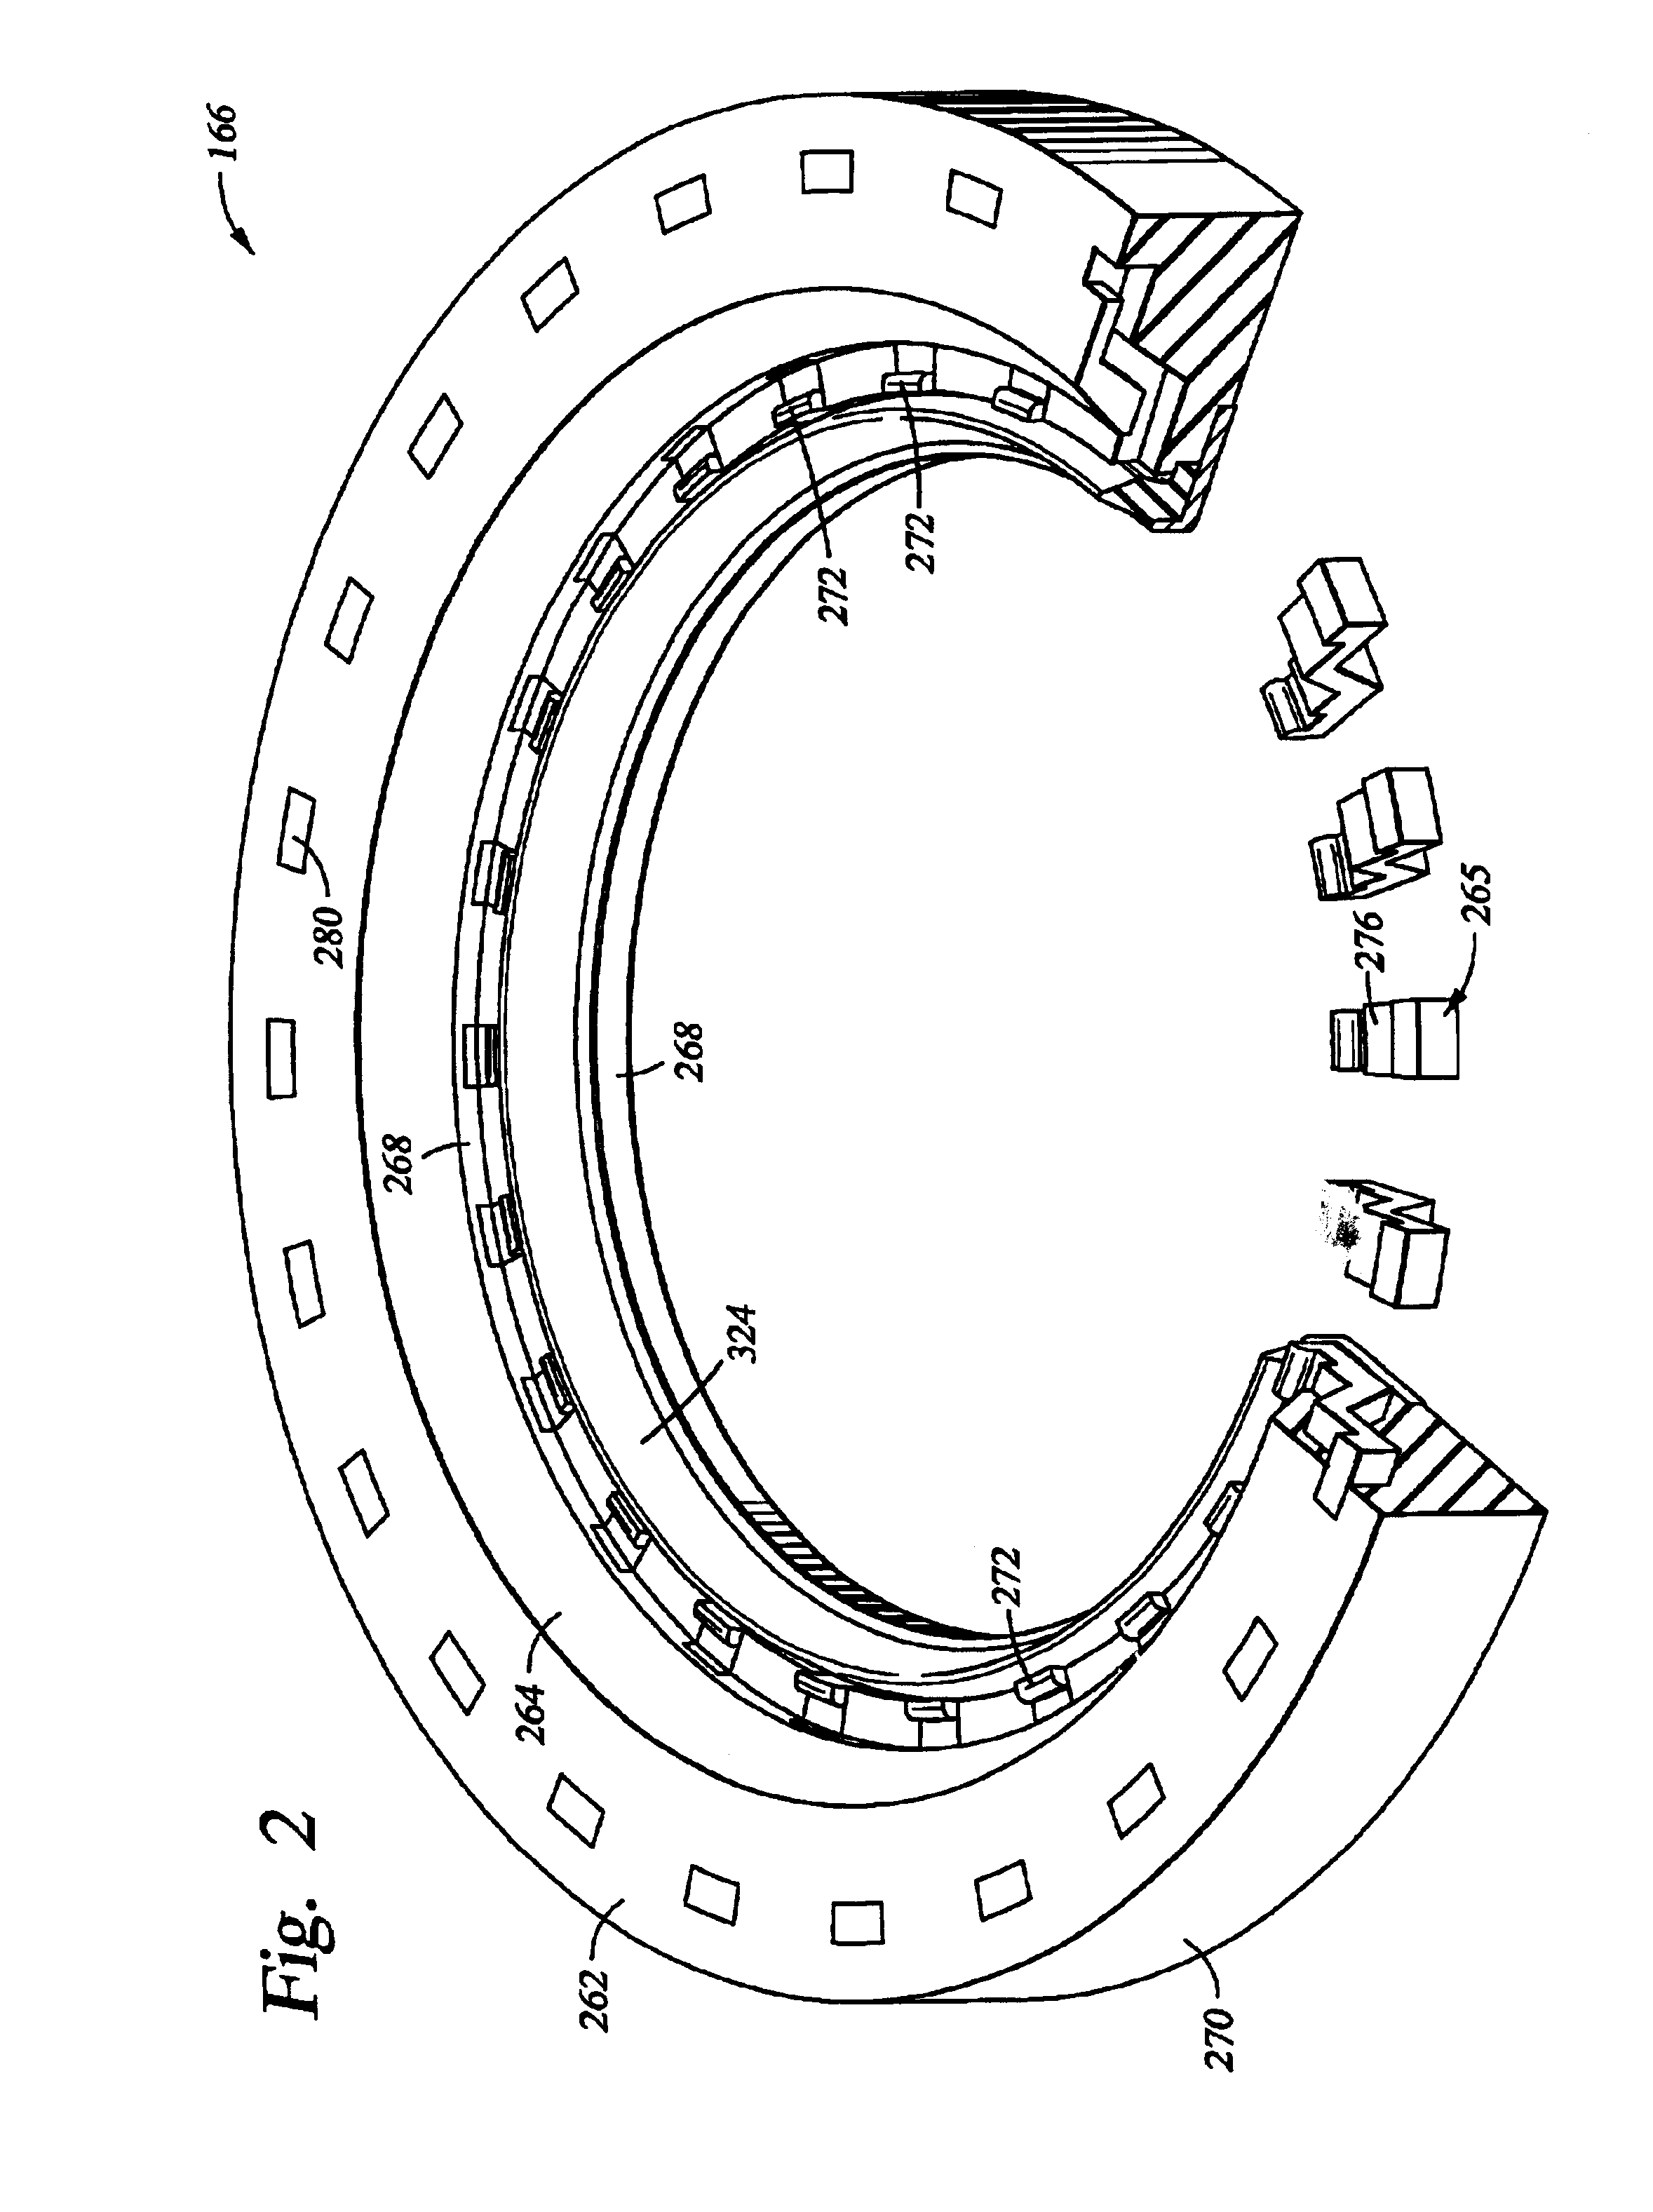 Method and apparatus for encapsulation of an edge of a substrate during an electro-chemical deposition process